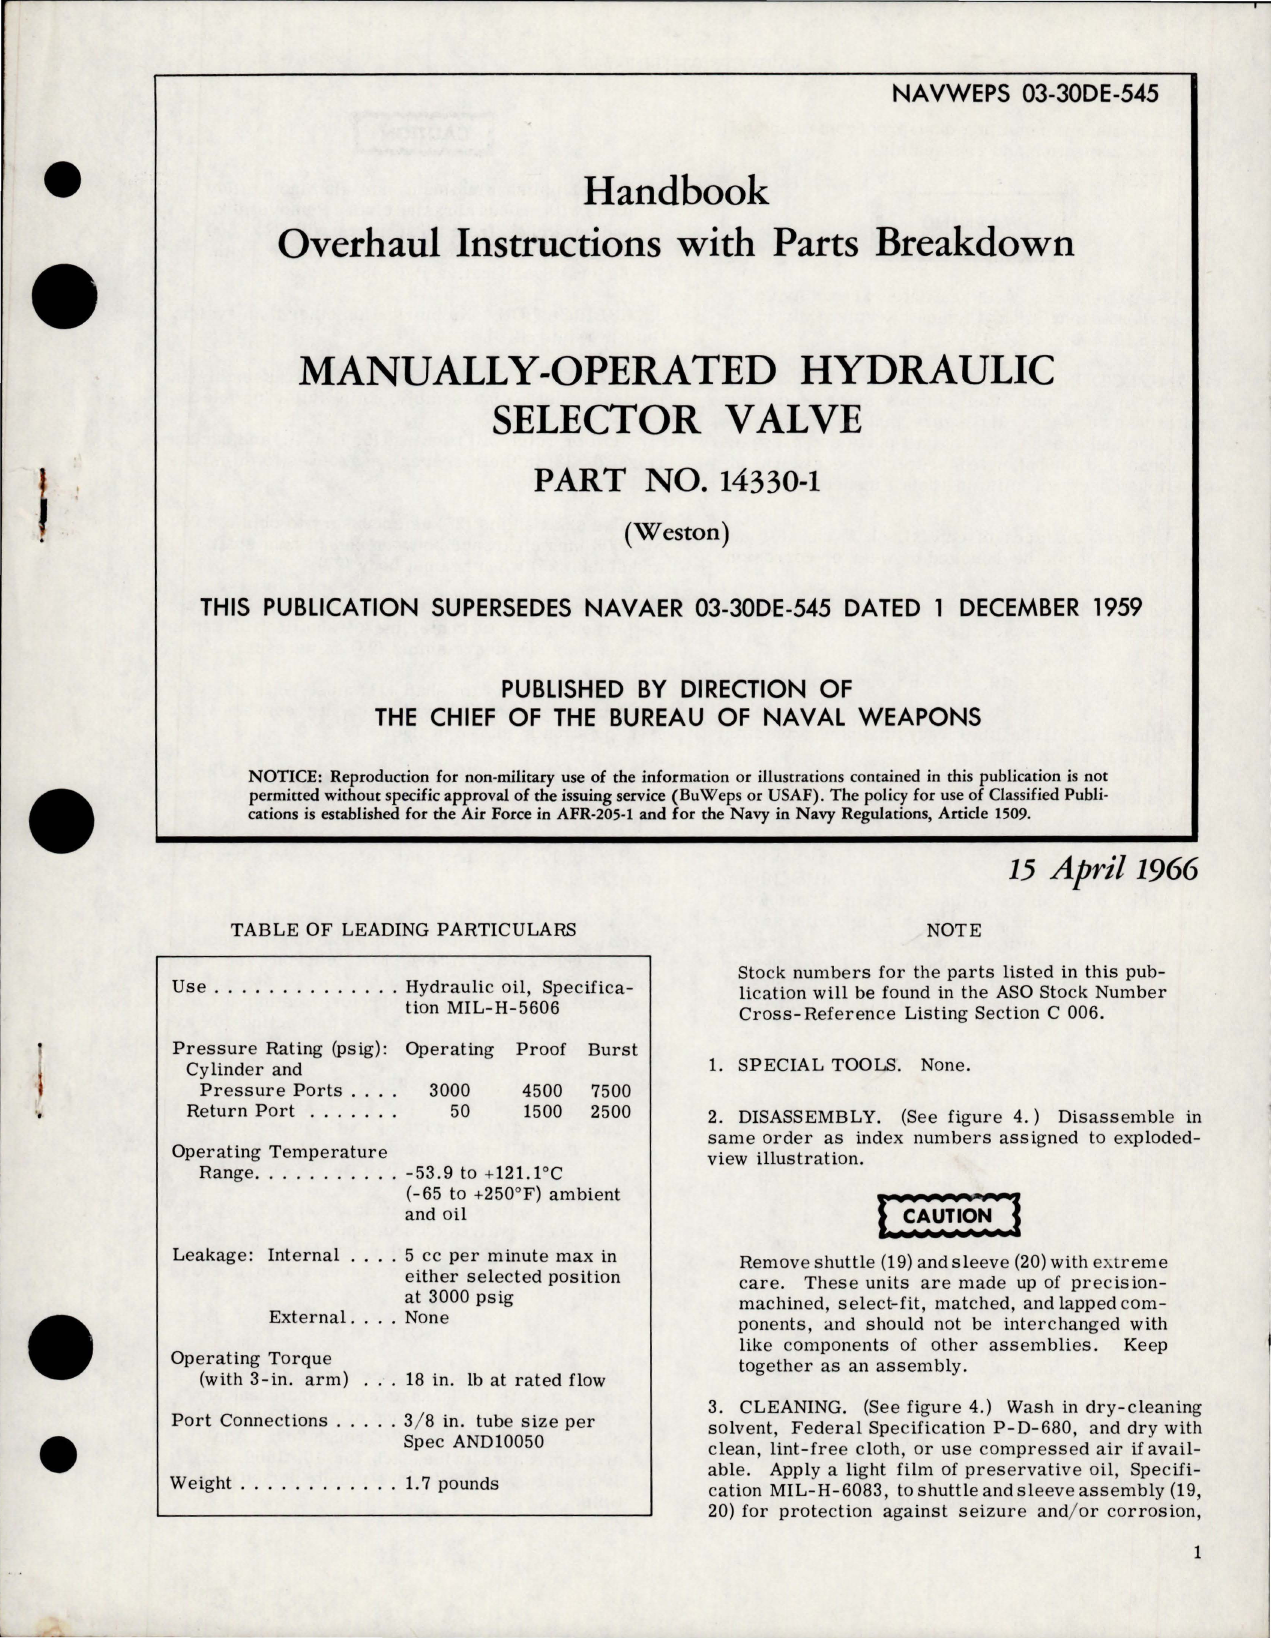 Sample page 1 from AirCorps Library document: Overhaul Instructions with Parts Breakdown for Manually Operated Hydraulic Selector Valve - Part 14330-1 